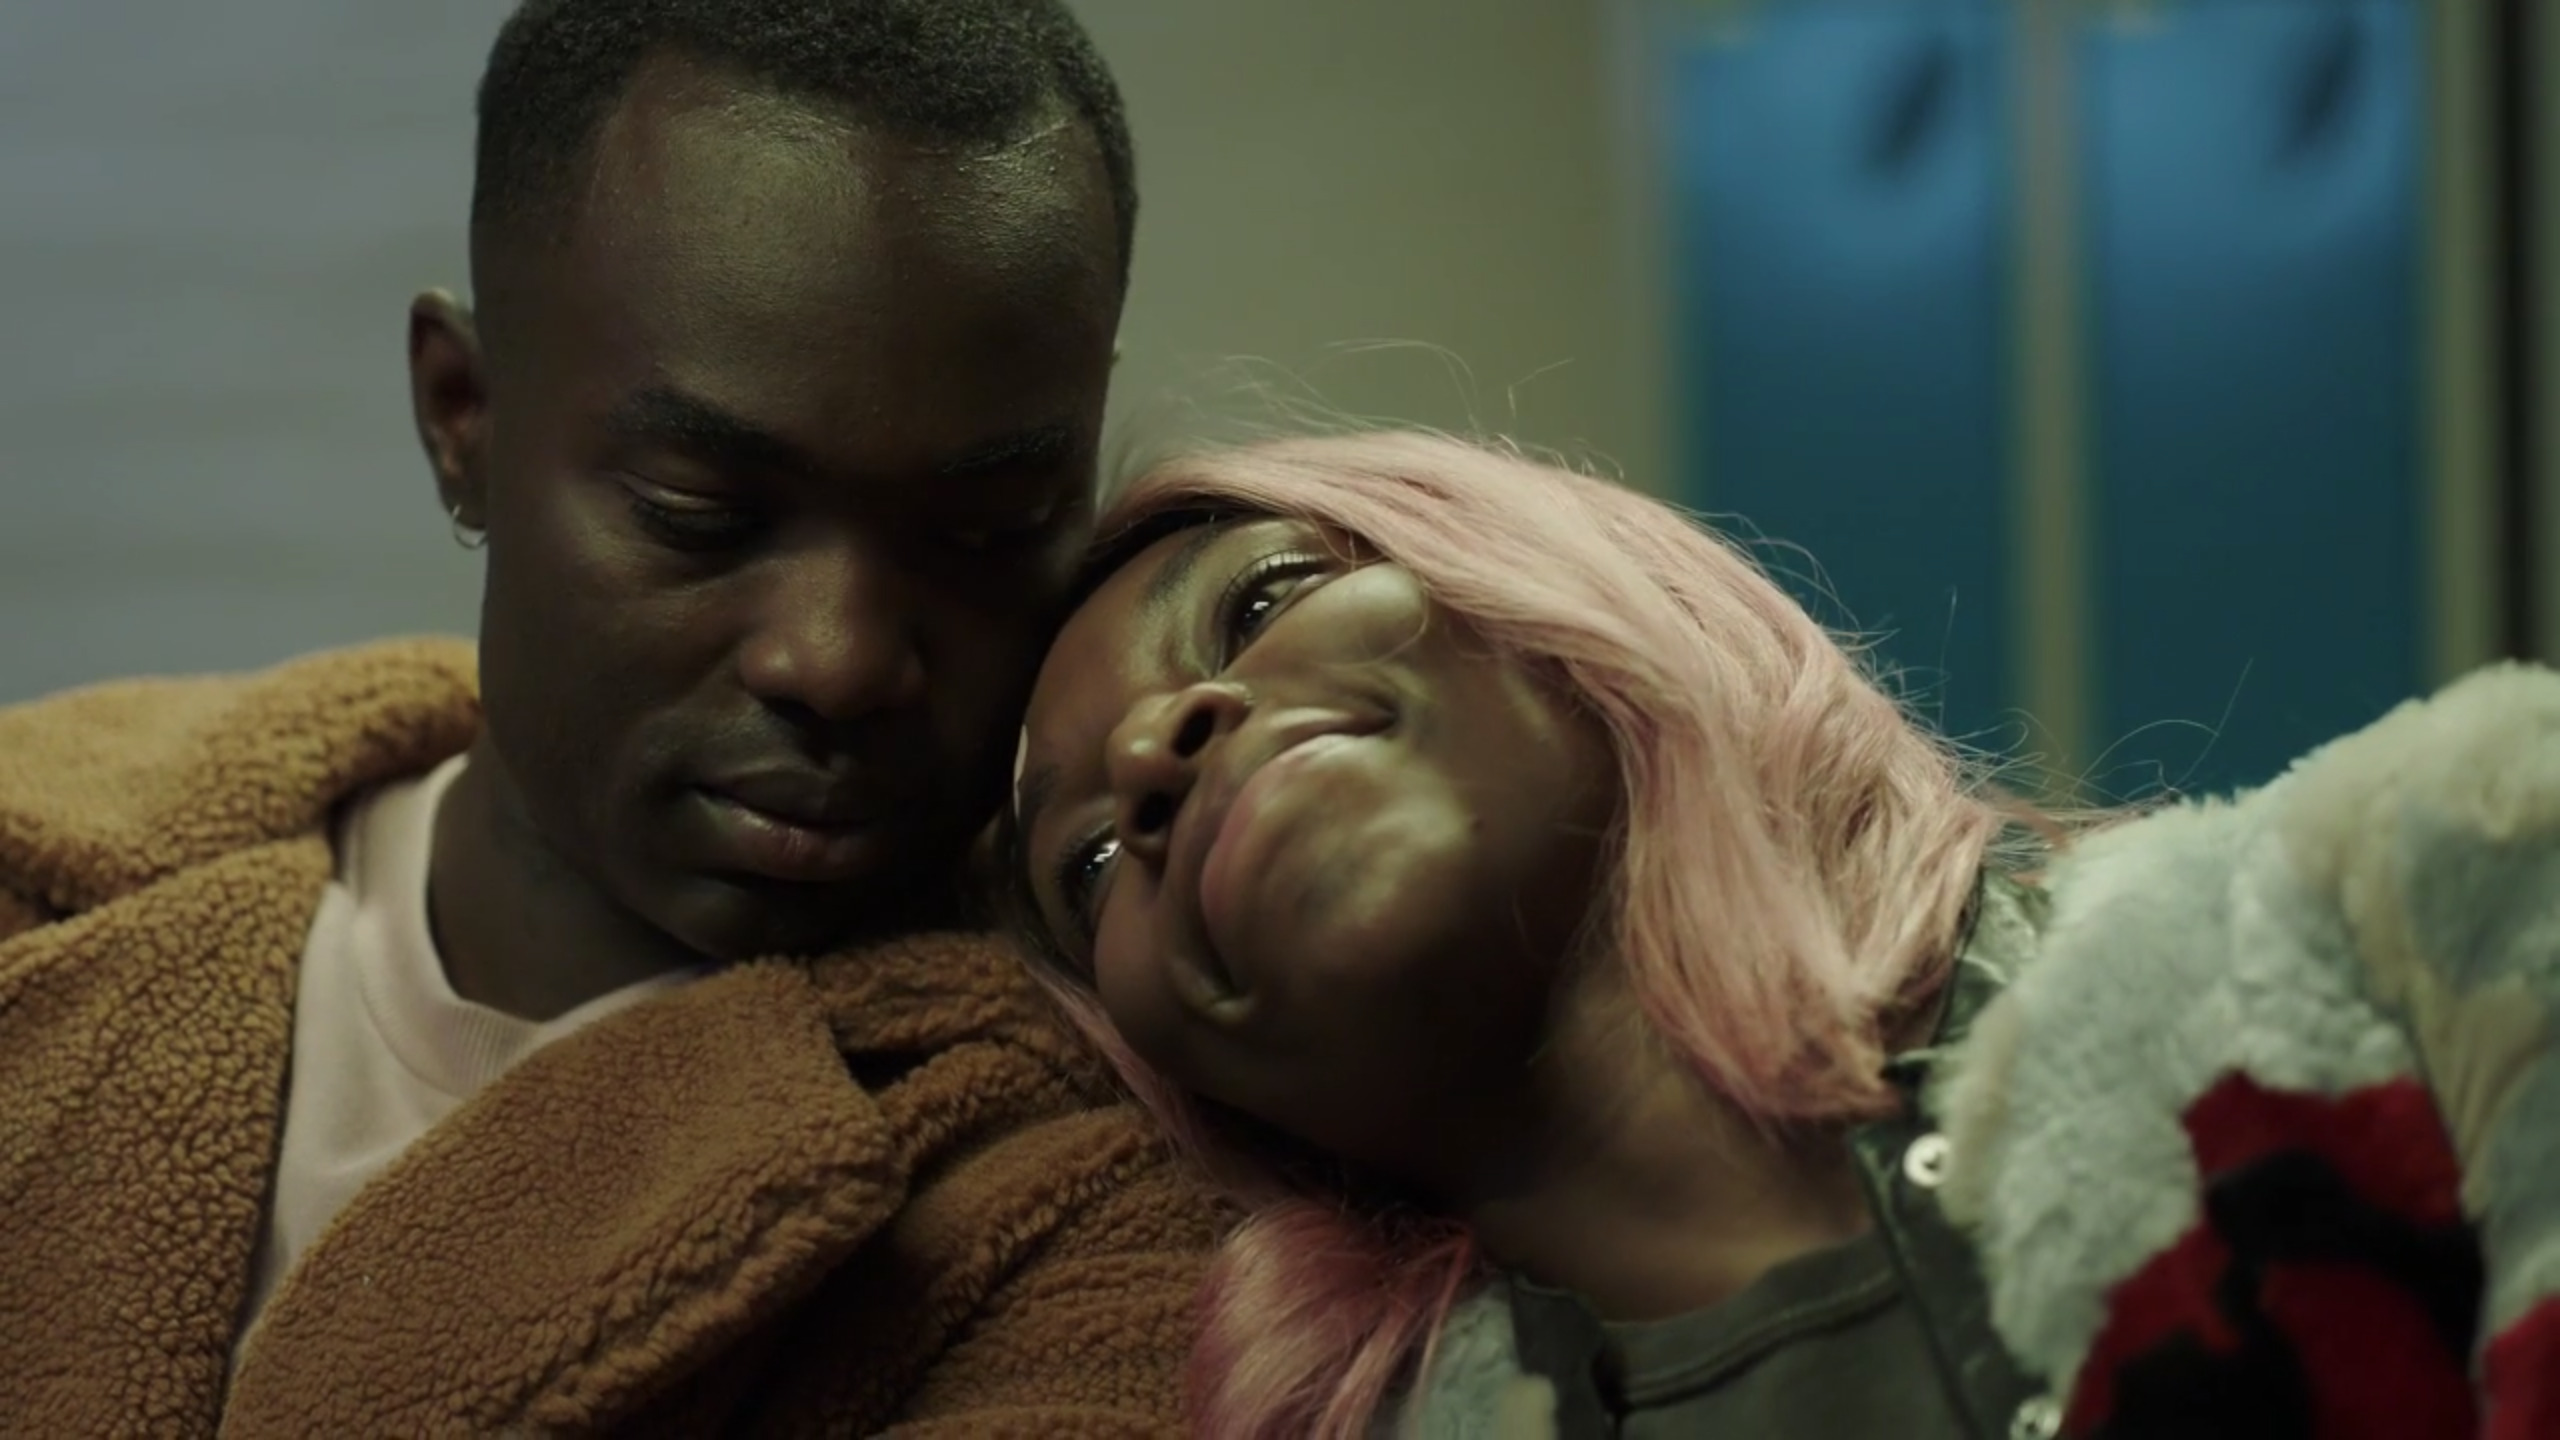 Left to Right: Paapa Essiedu as Kwame, and Michaela Cole as Arabella